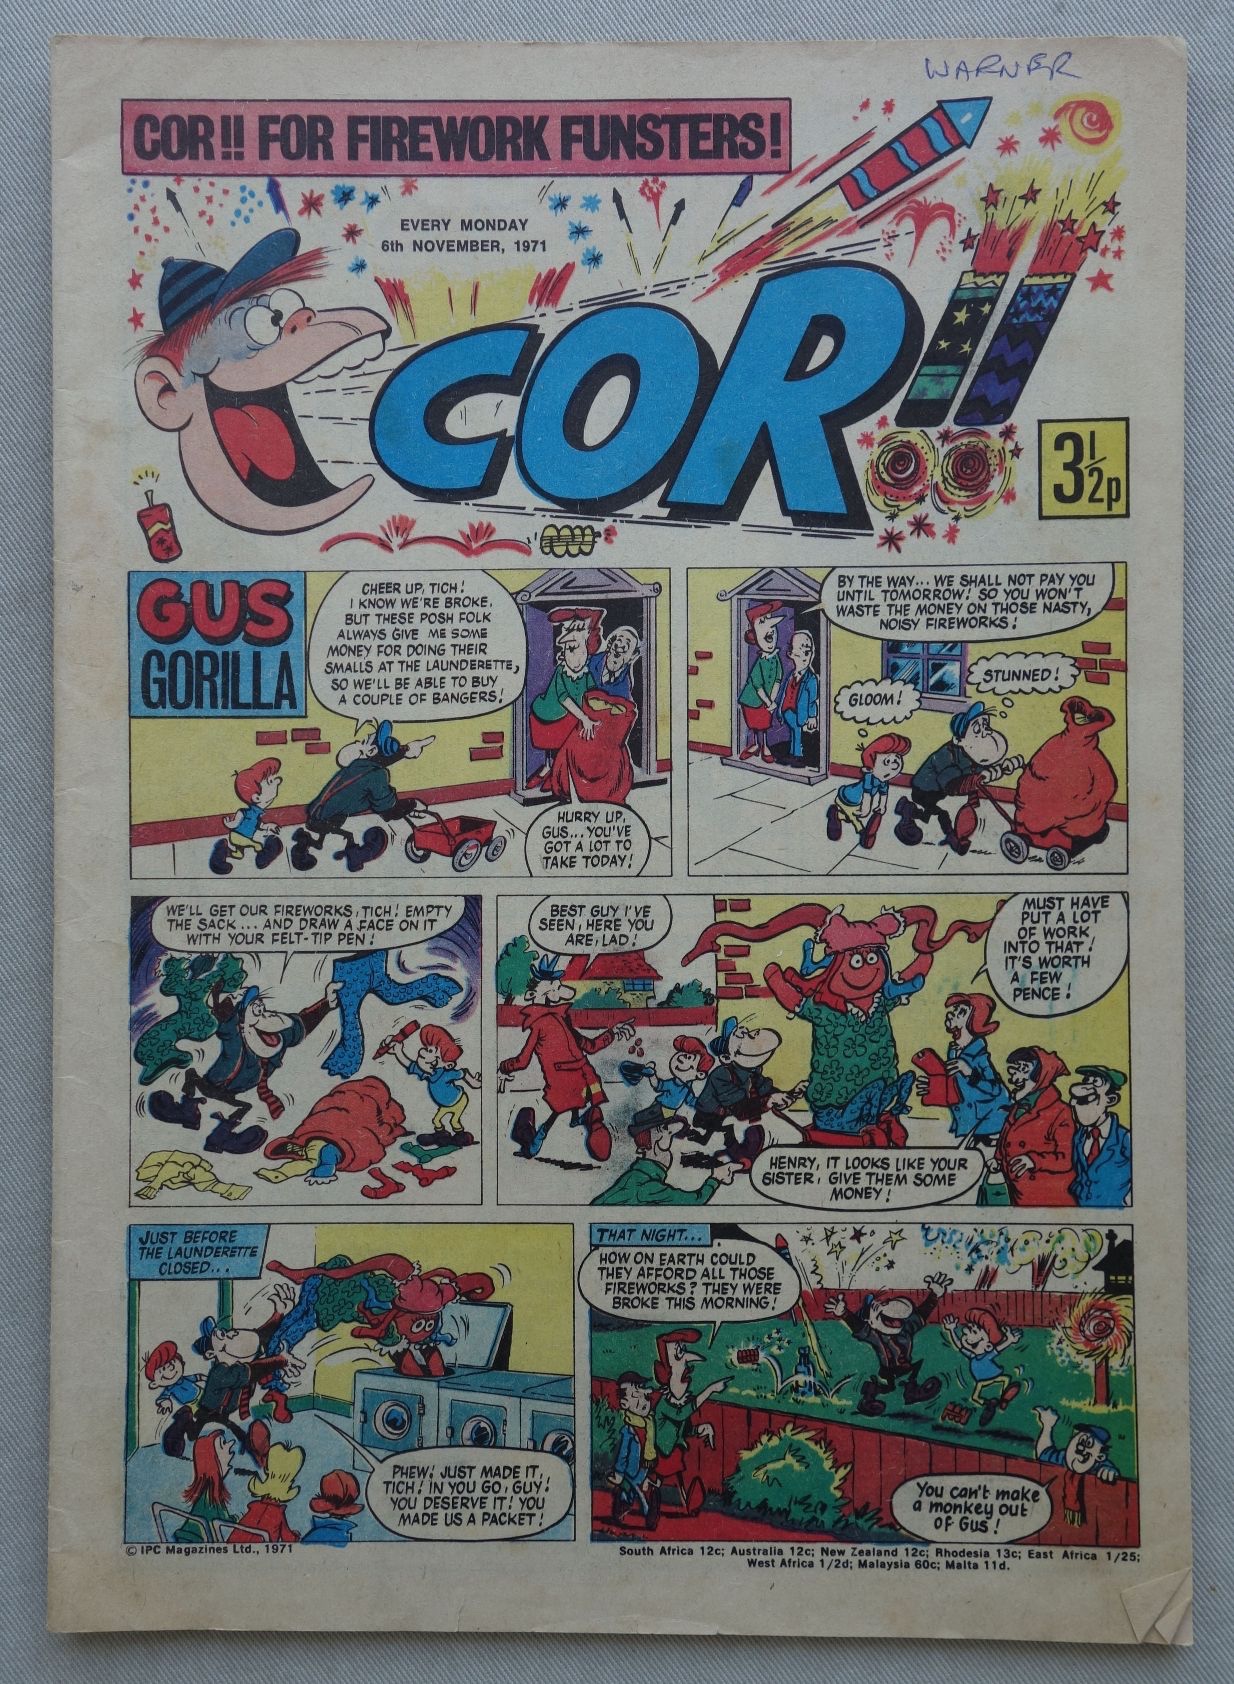 Cor!! - Fireworks issue, cover dated 6th November 1971